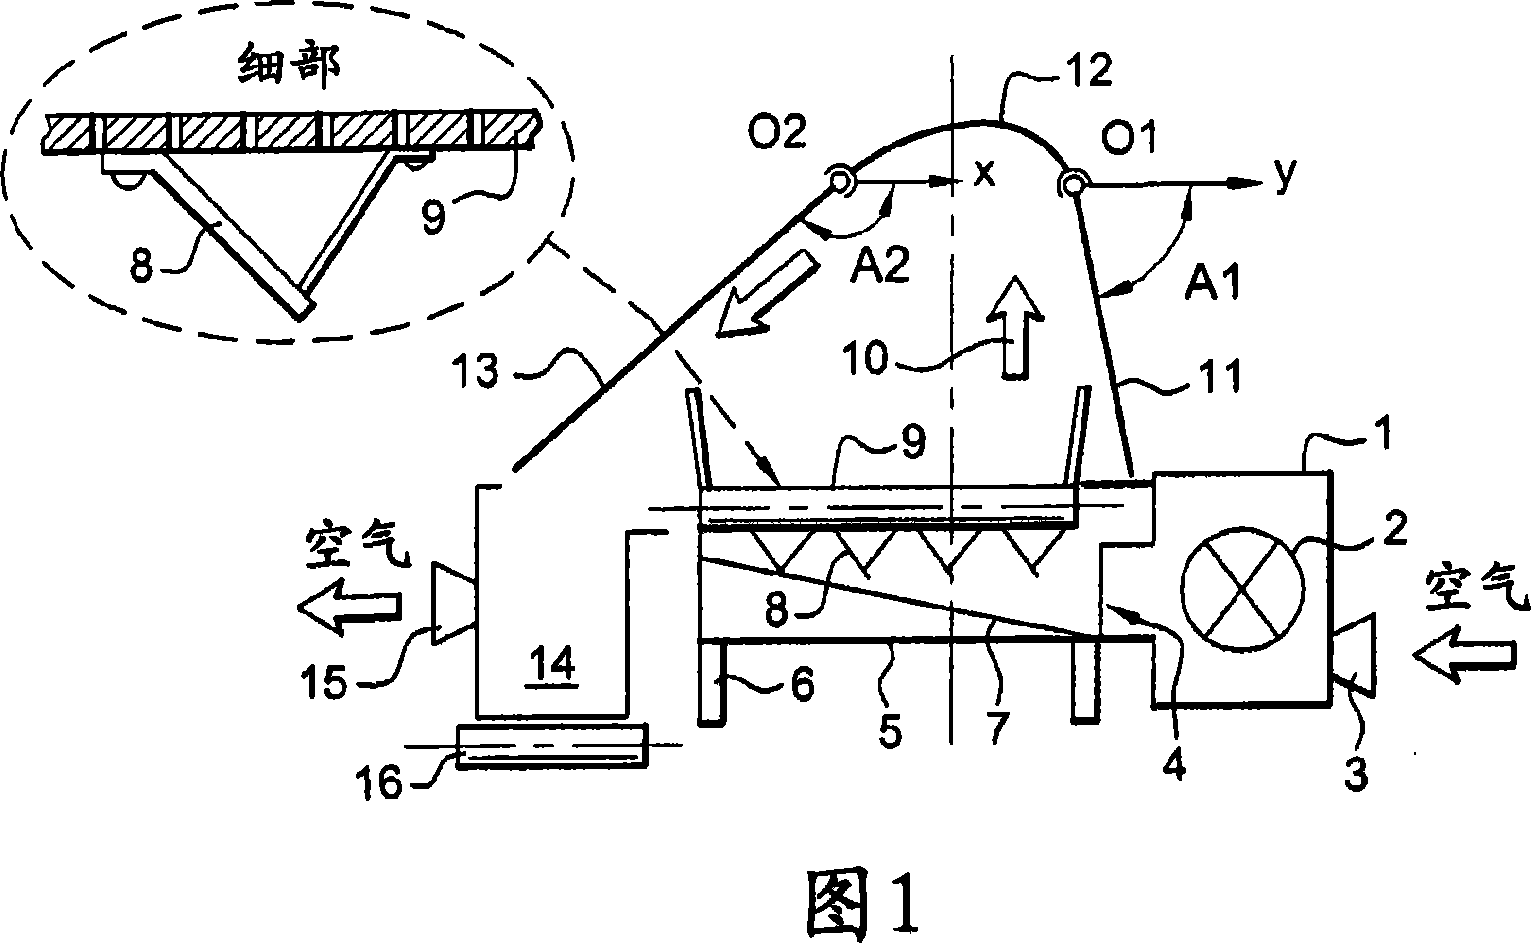 Method for removing straw from agriculture products and a straw removing device for carrying out said method